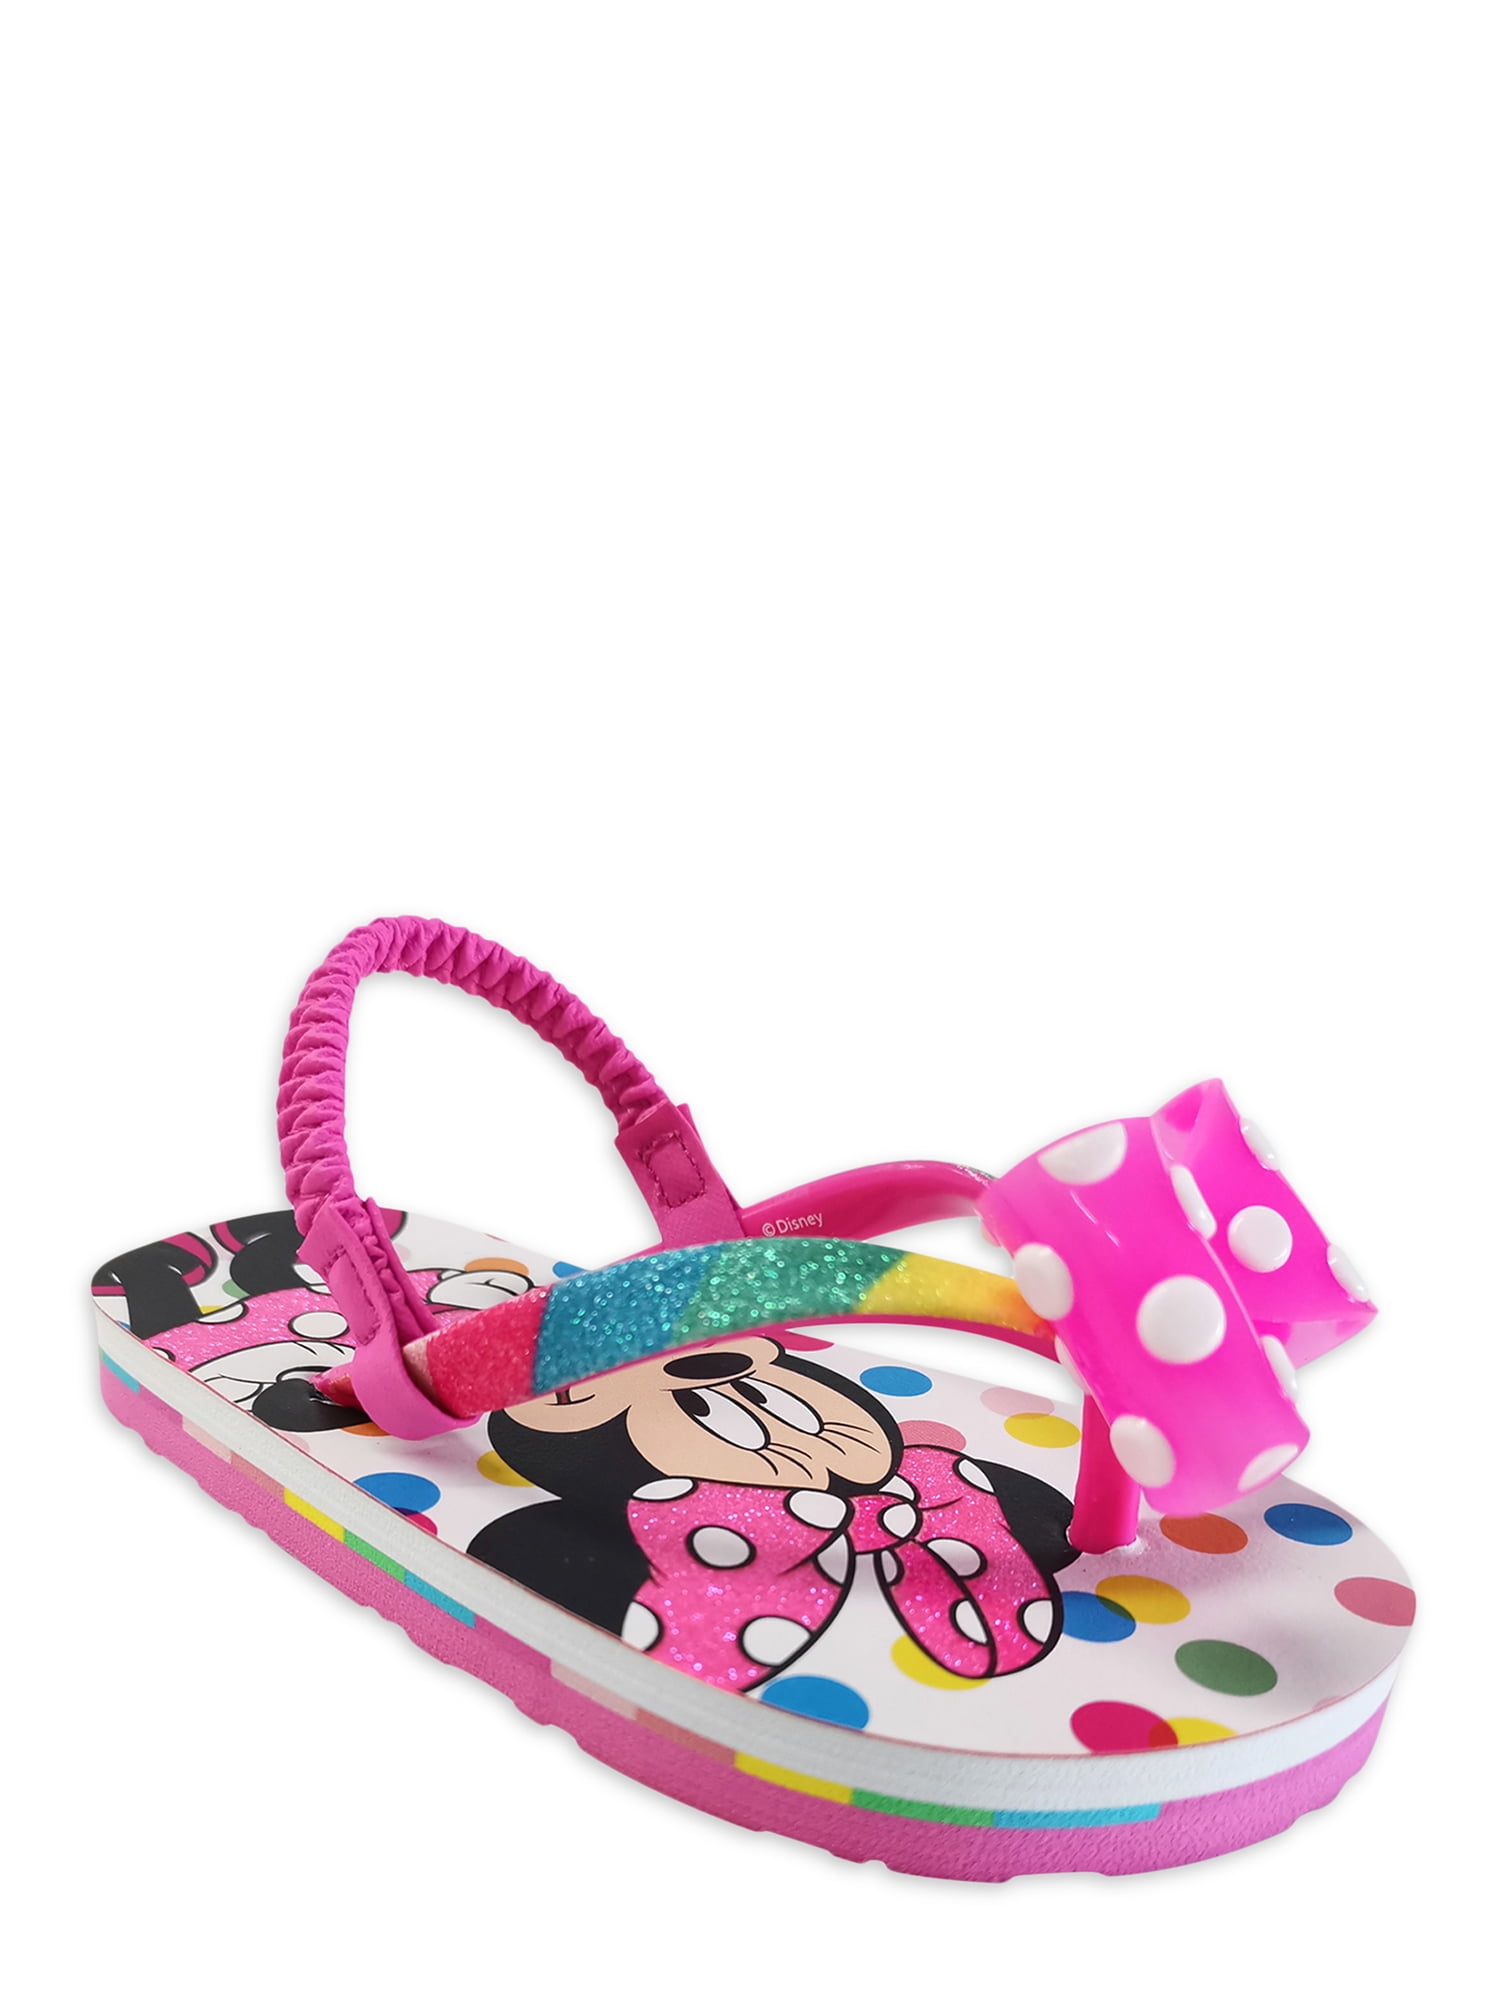 Girls Minnie & Mickey Mouse Kissing pink flip flops size  13/1 NWT 